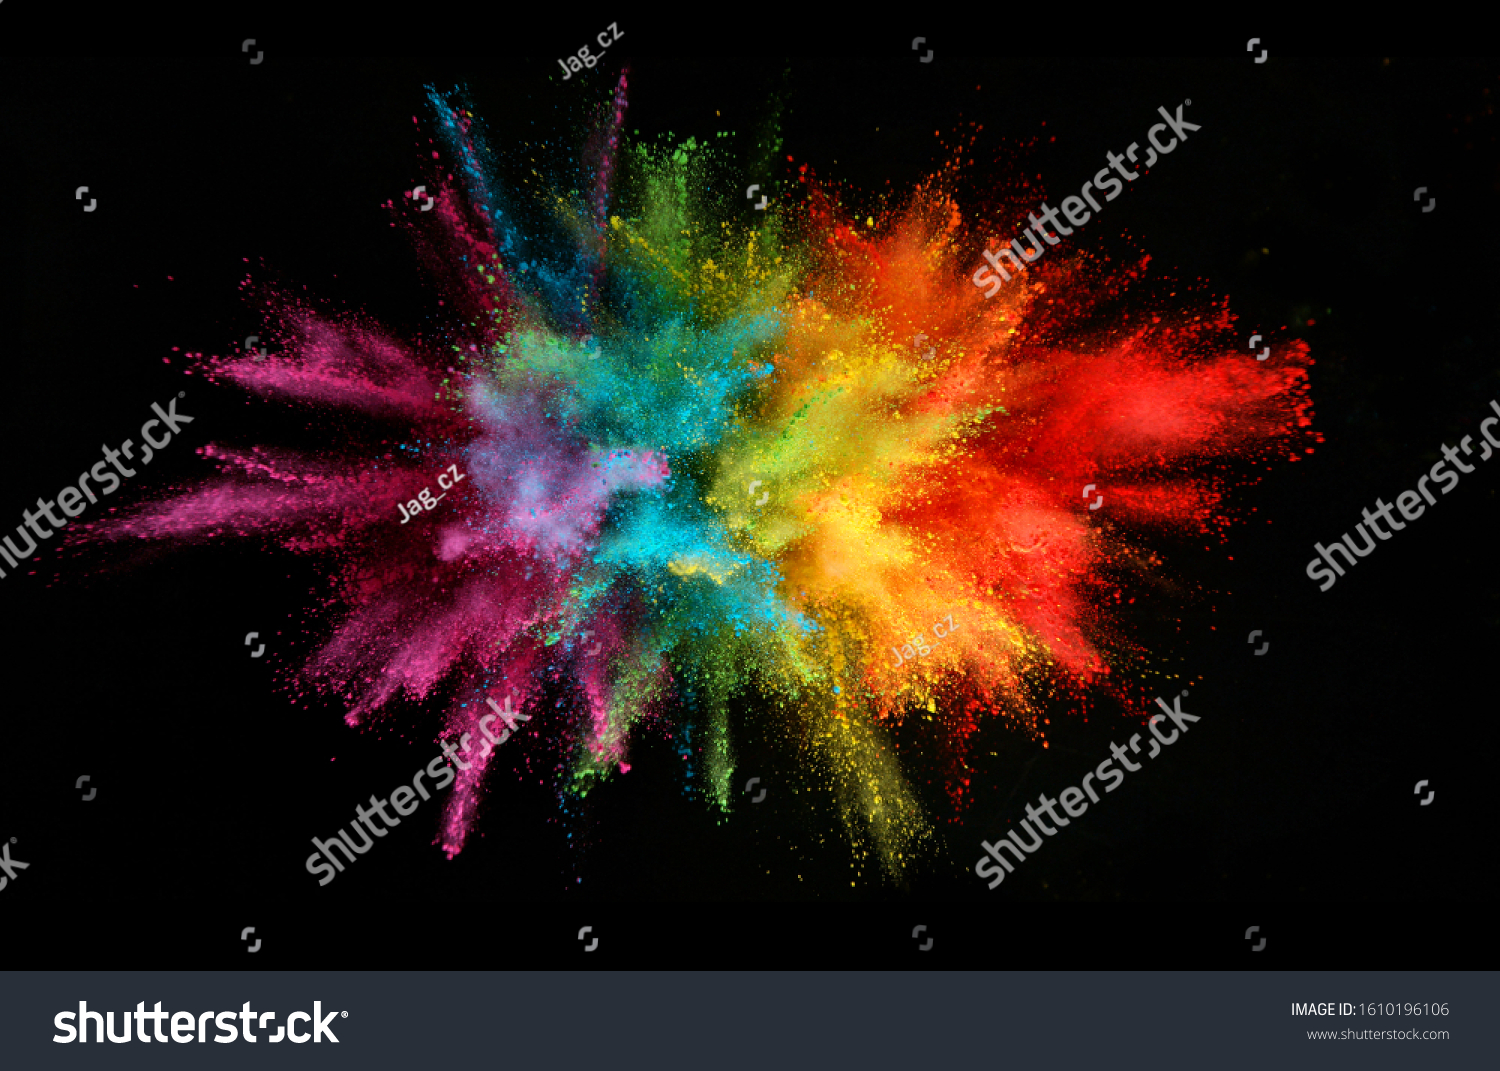 Explosion of colored powder isolated on black background. Abstract colored background #1610196106